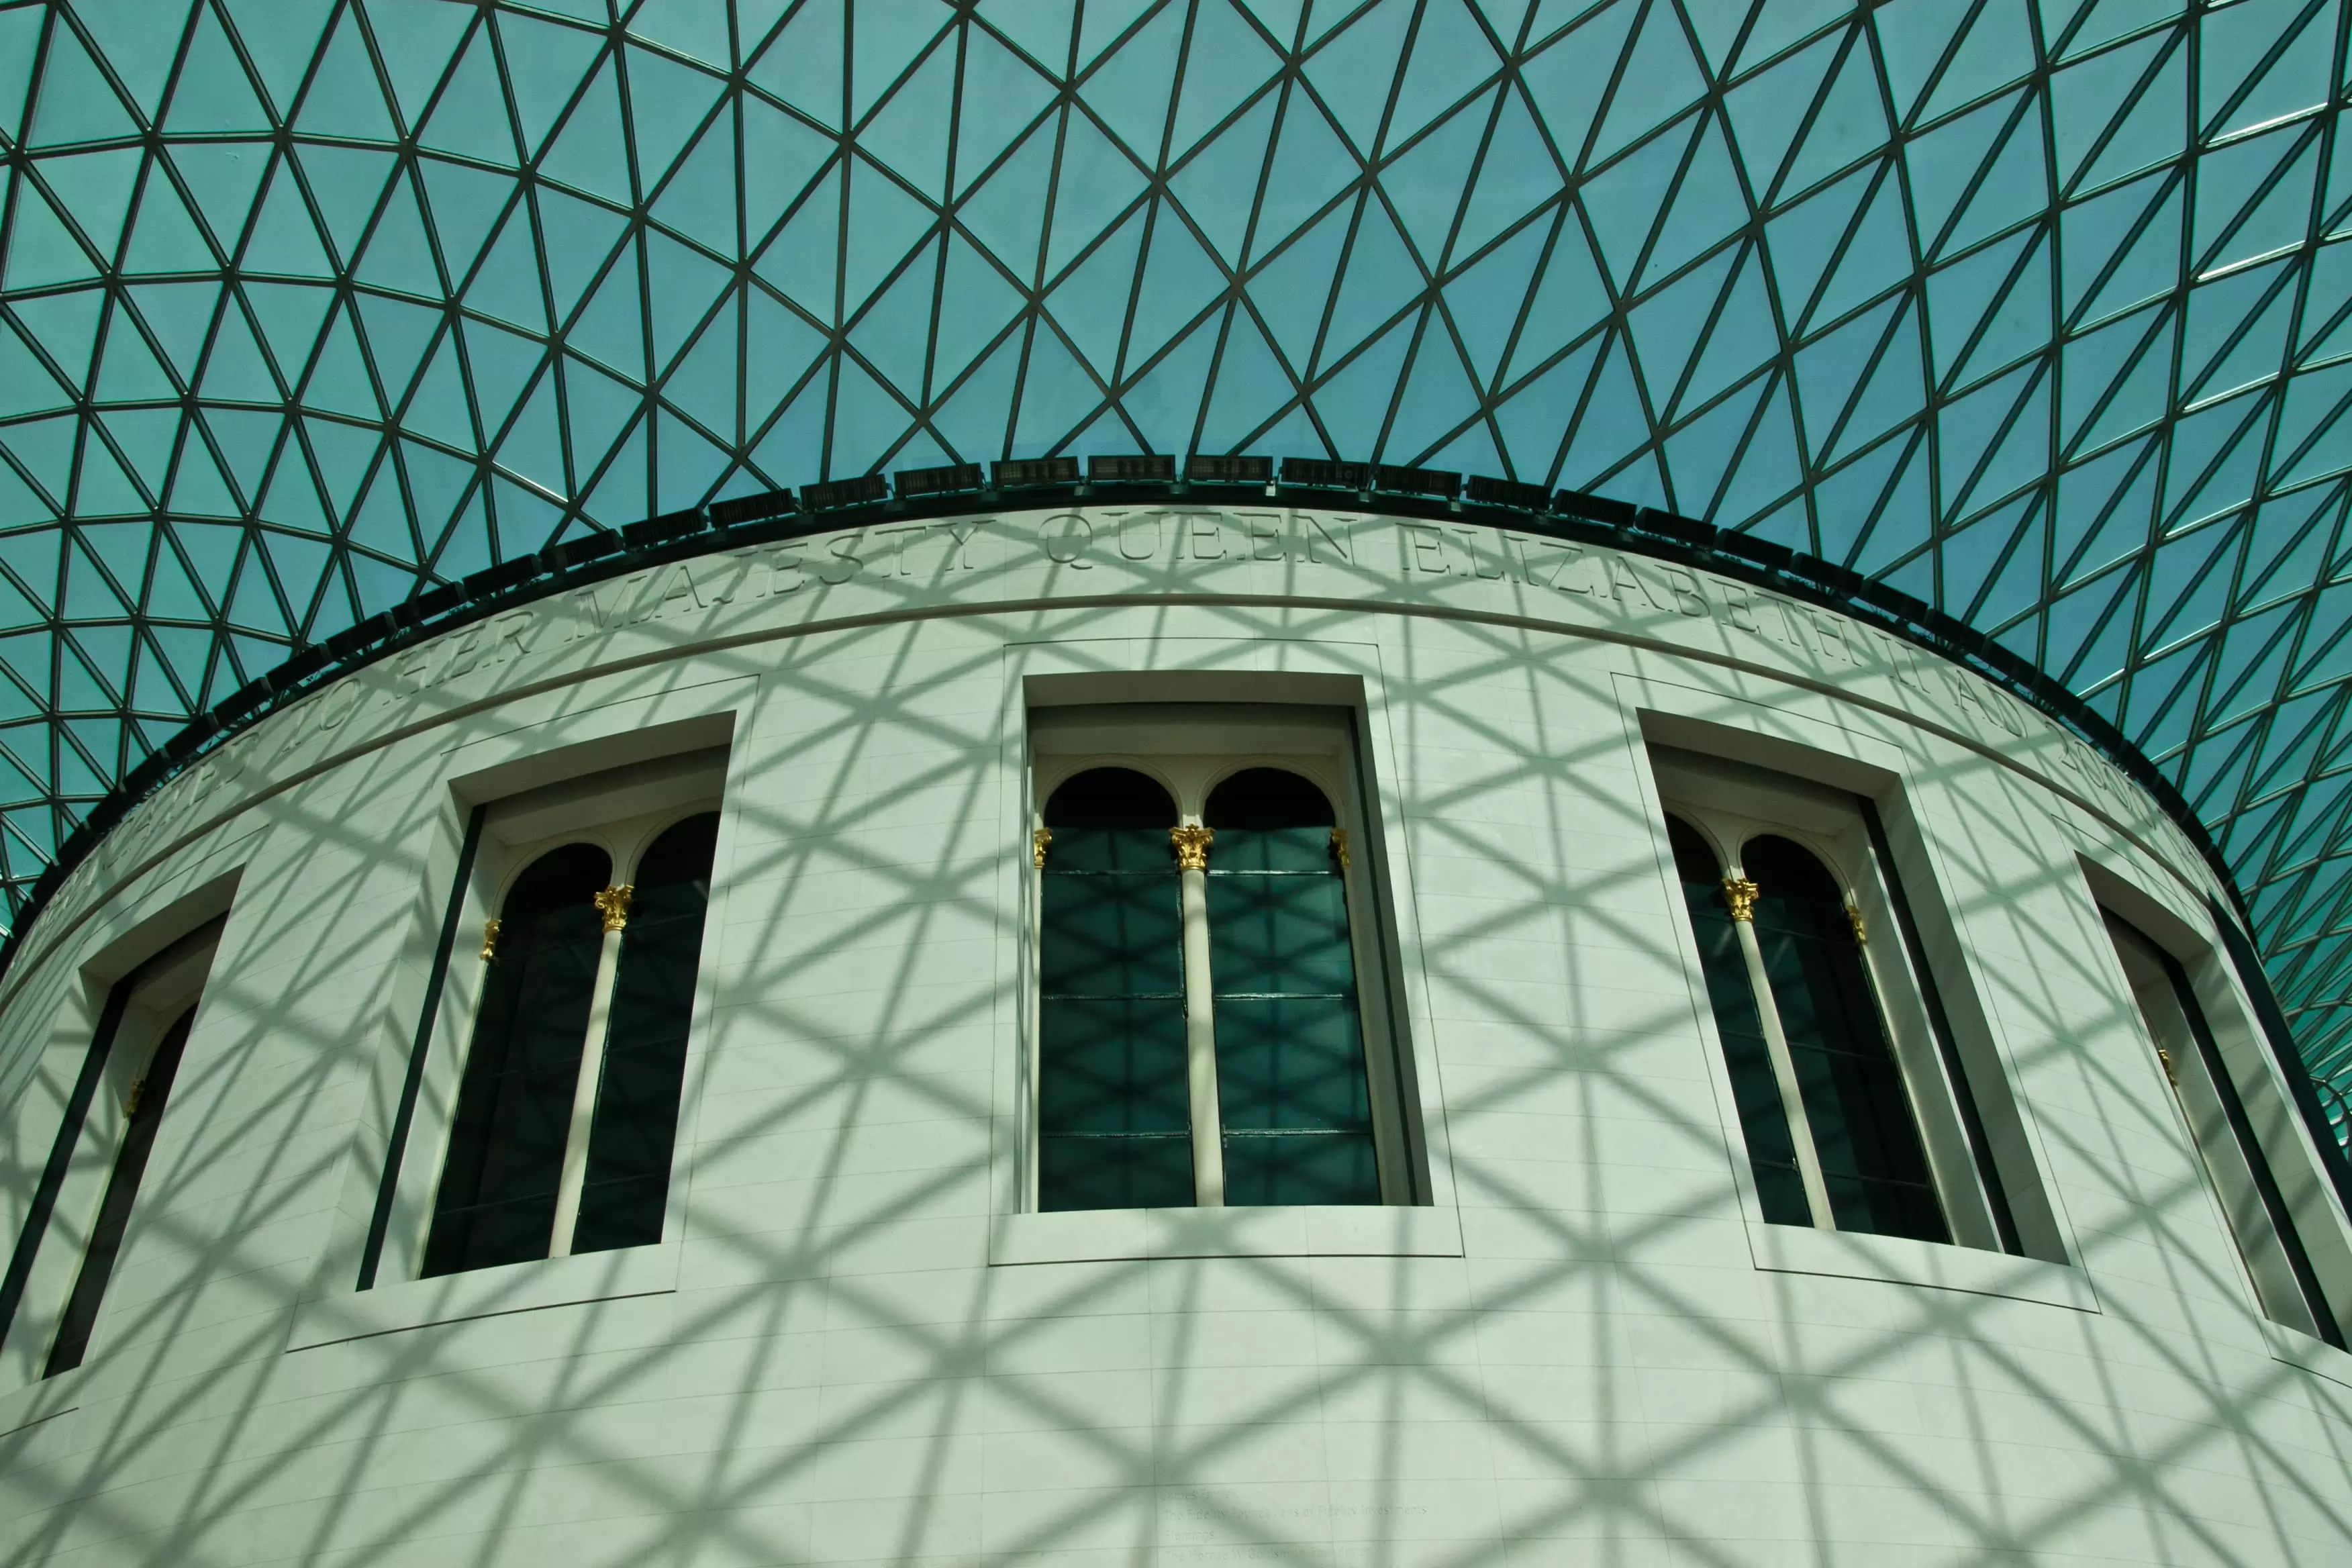 An interior view of the British Museum's roof